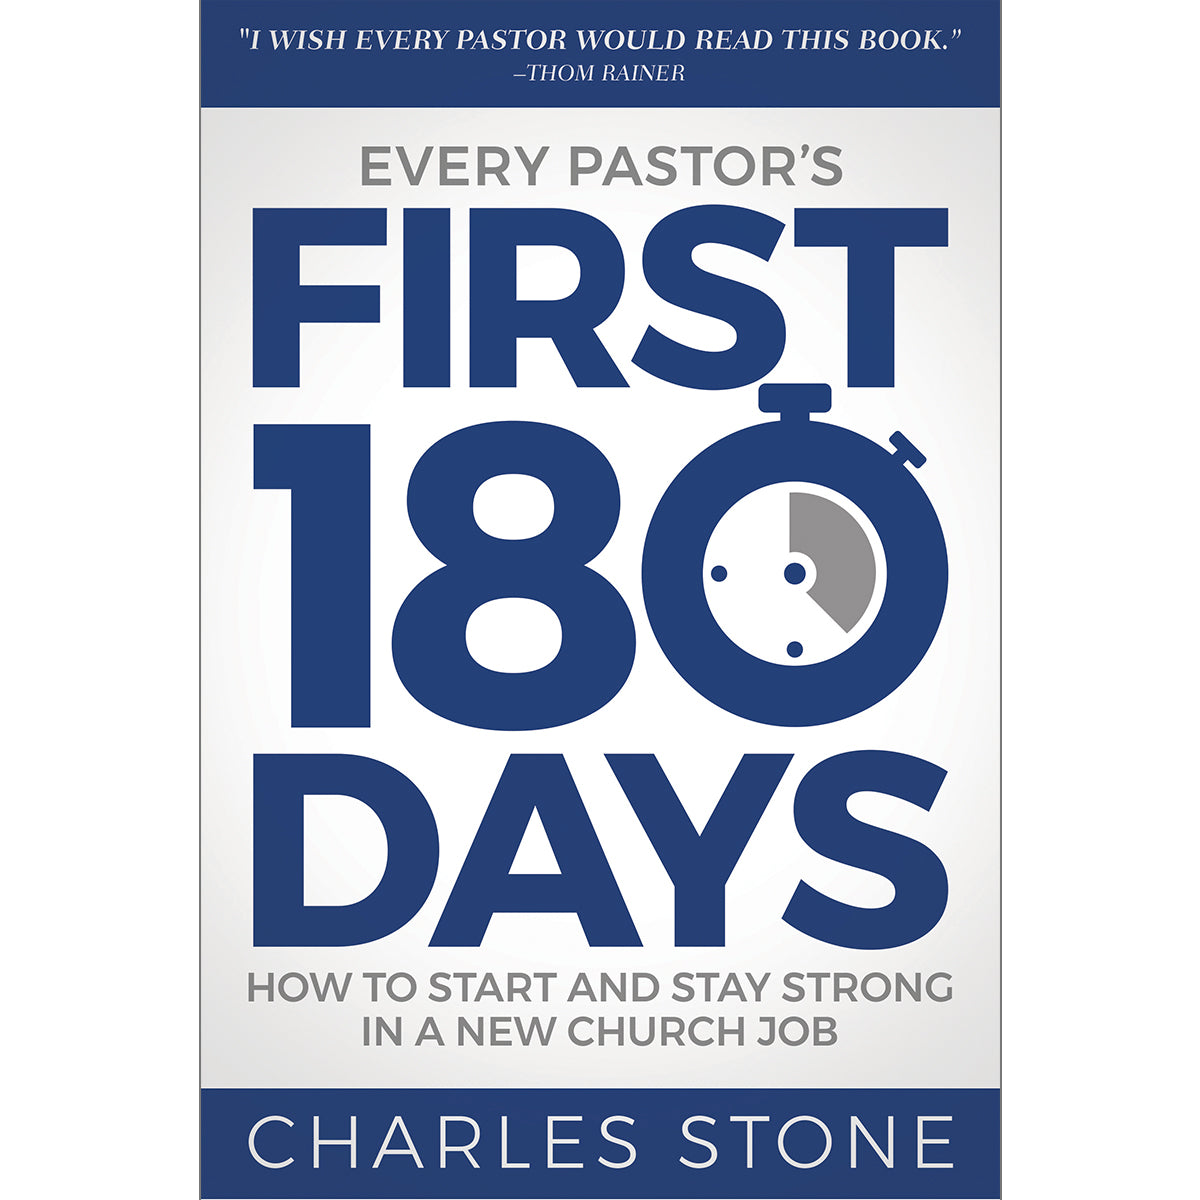 Every Pastor's First 180 Days: How to Start and Stay Strong In A New Church Job